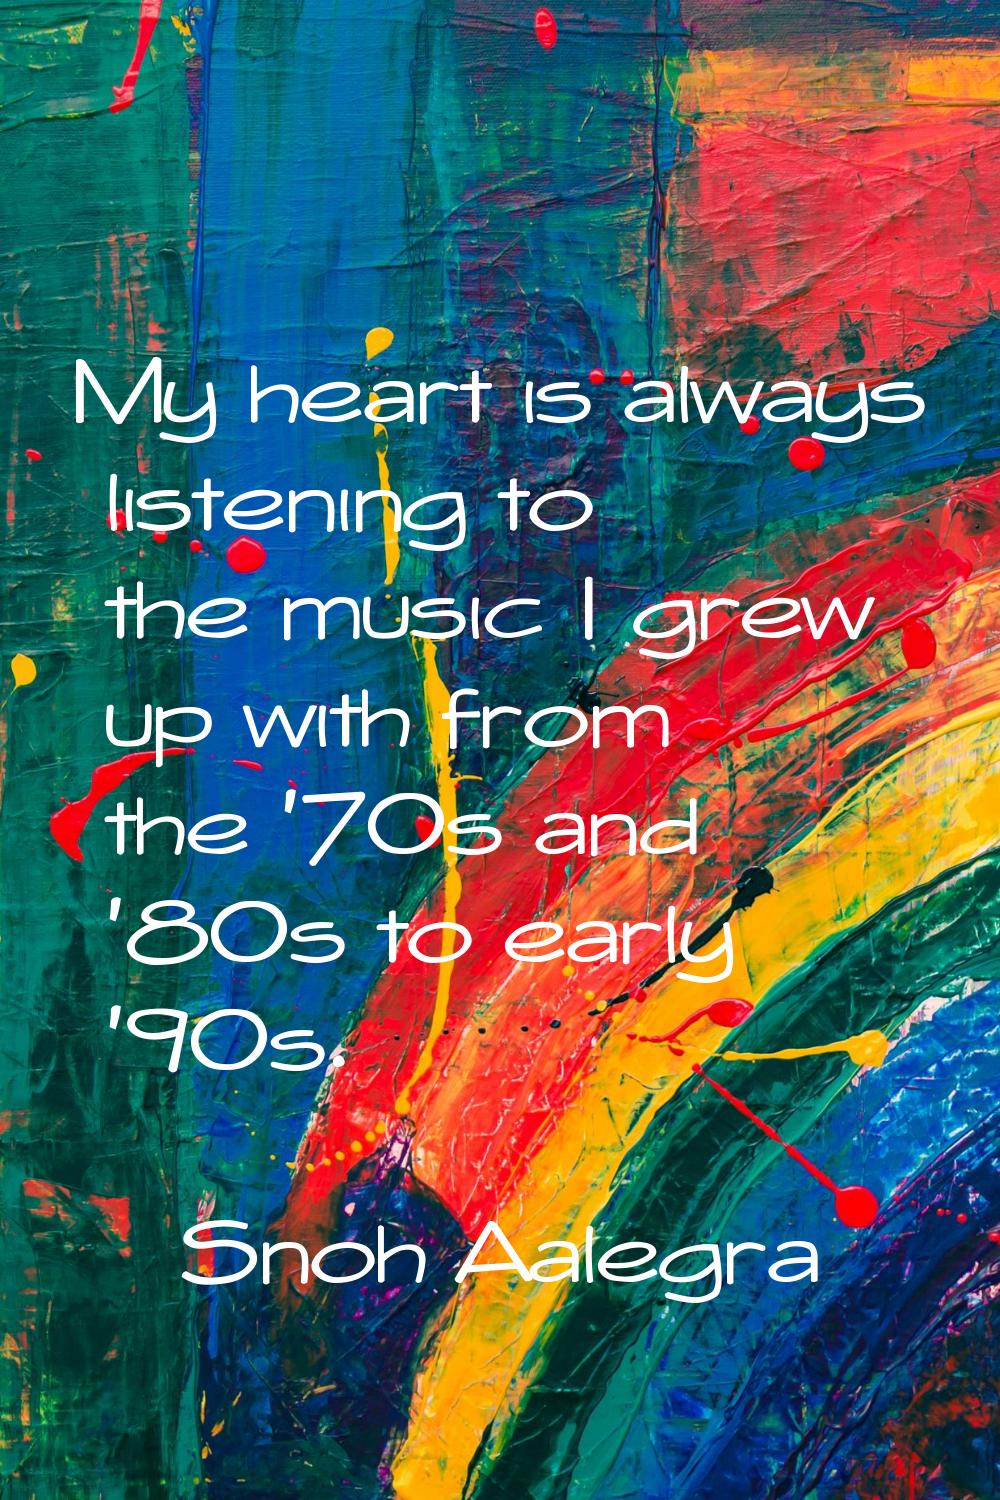 My heart is always listening to the music I grew up with from the '70s and '80s to early '90s.